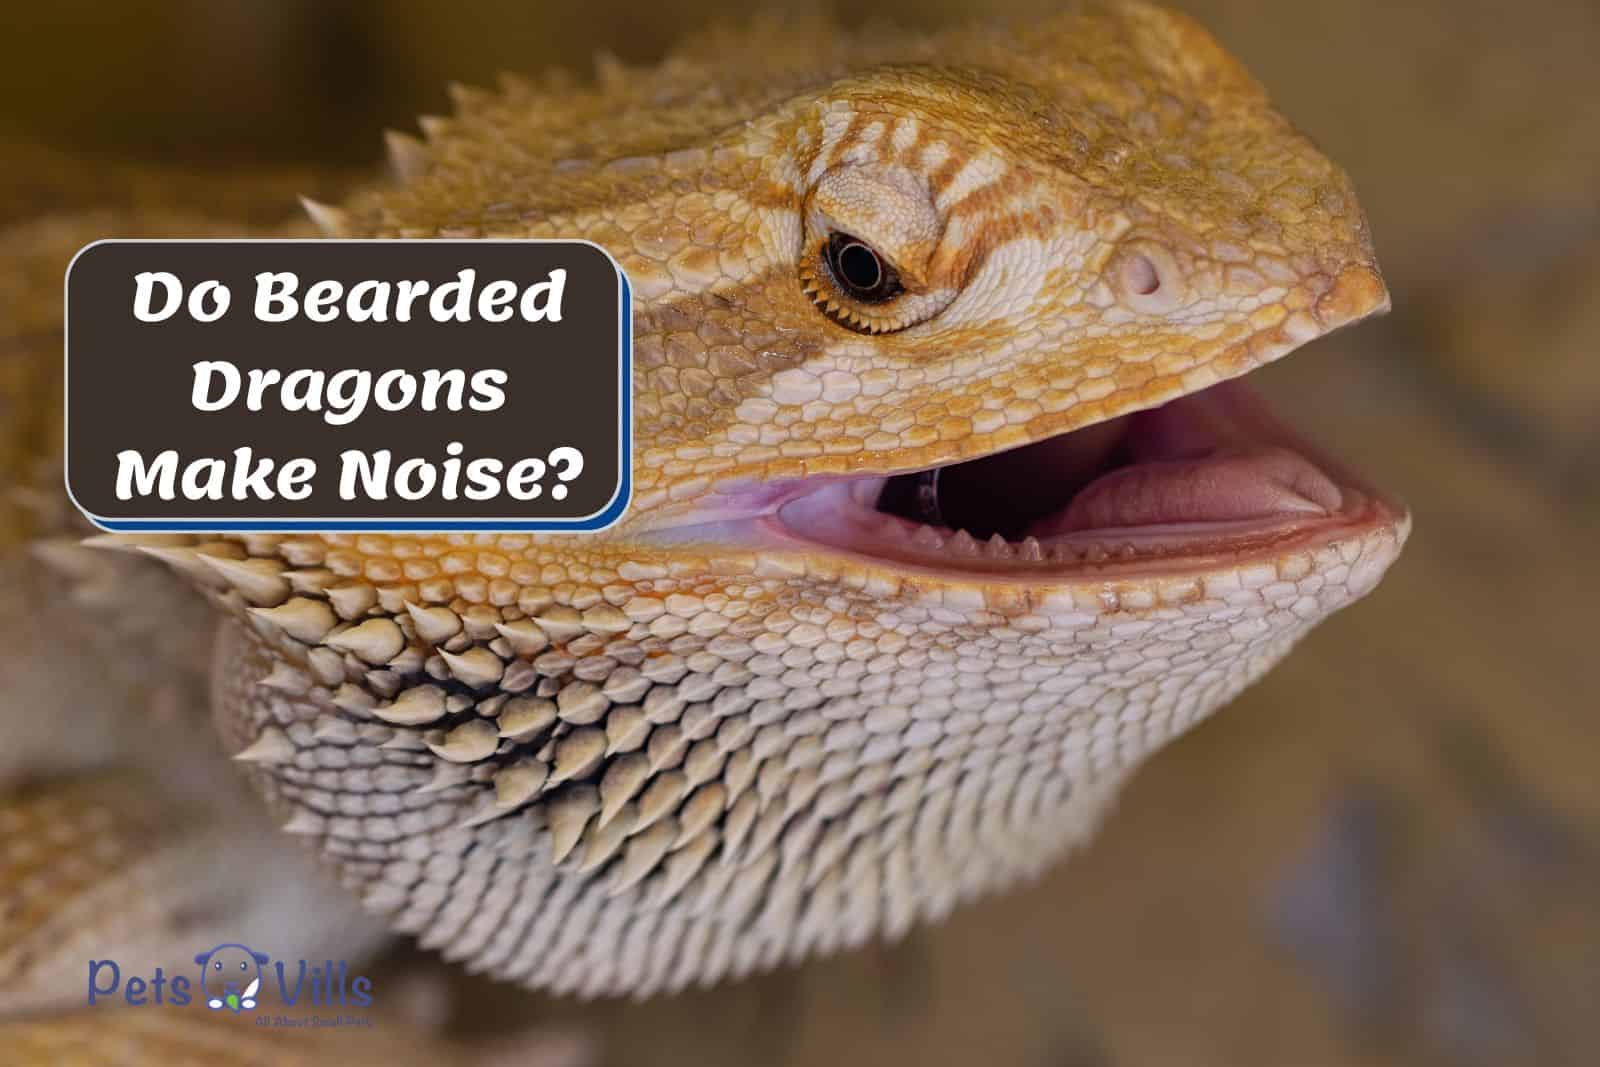 a beardie with an open mouth beside 